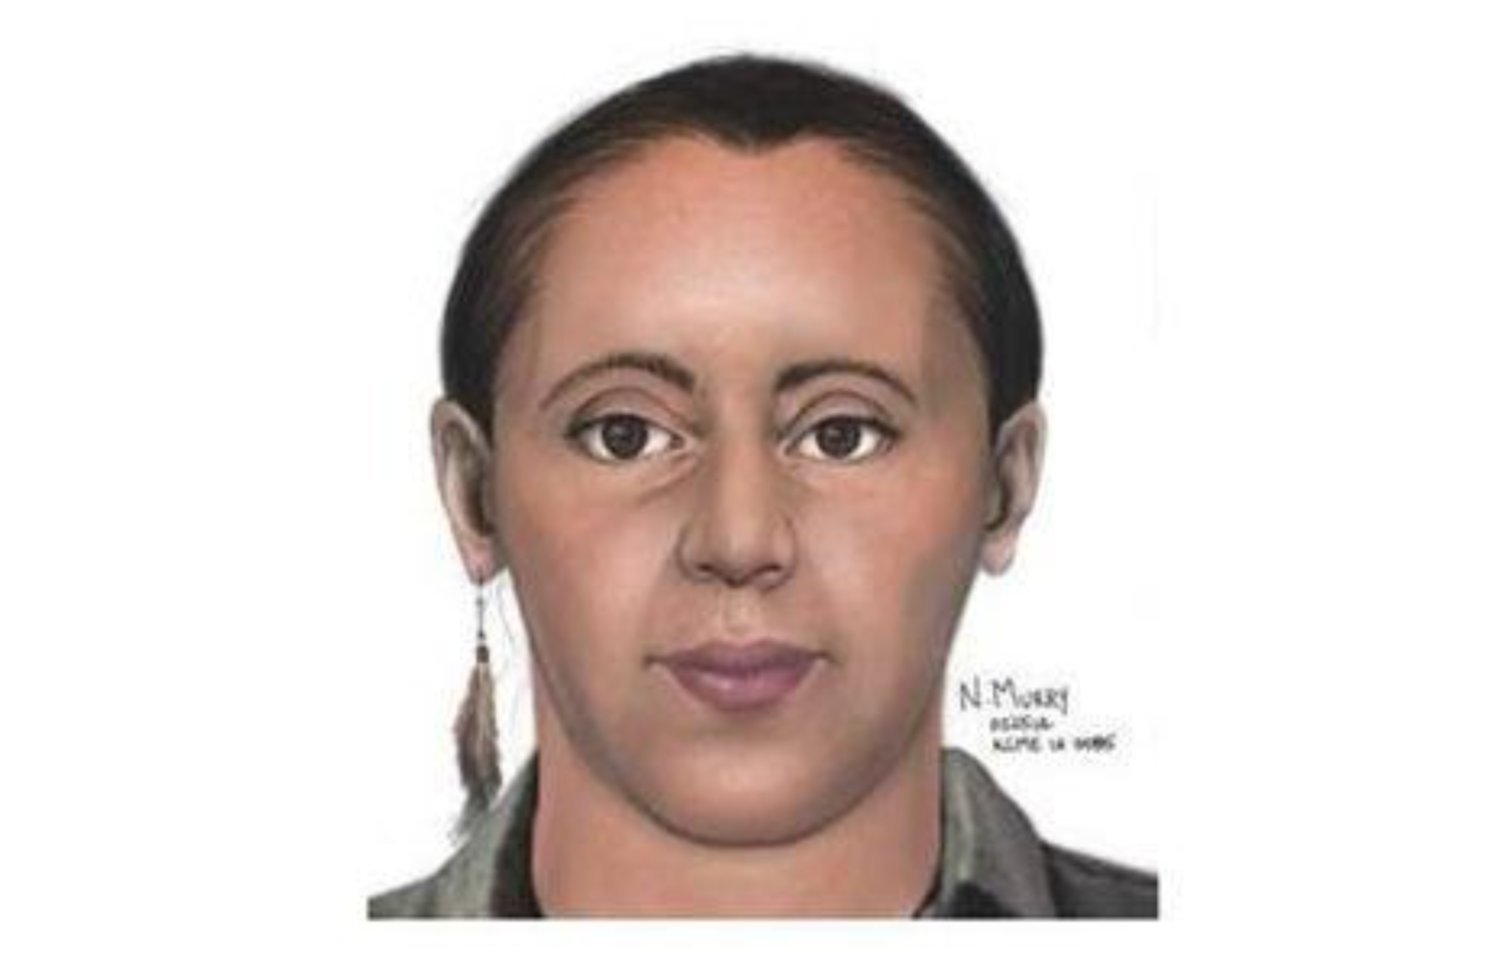 Helen Doe, who is believed to have been Native, died on May 14, 1991 when the semi tractor-trailer she was riding in rear-ended another on Interstate 5 near Kalama, Wash. Washington State Patrol investigators still hope to identify her and released this recreation of what she may have looked like by forensic artist Natalie Murry.